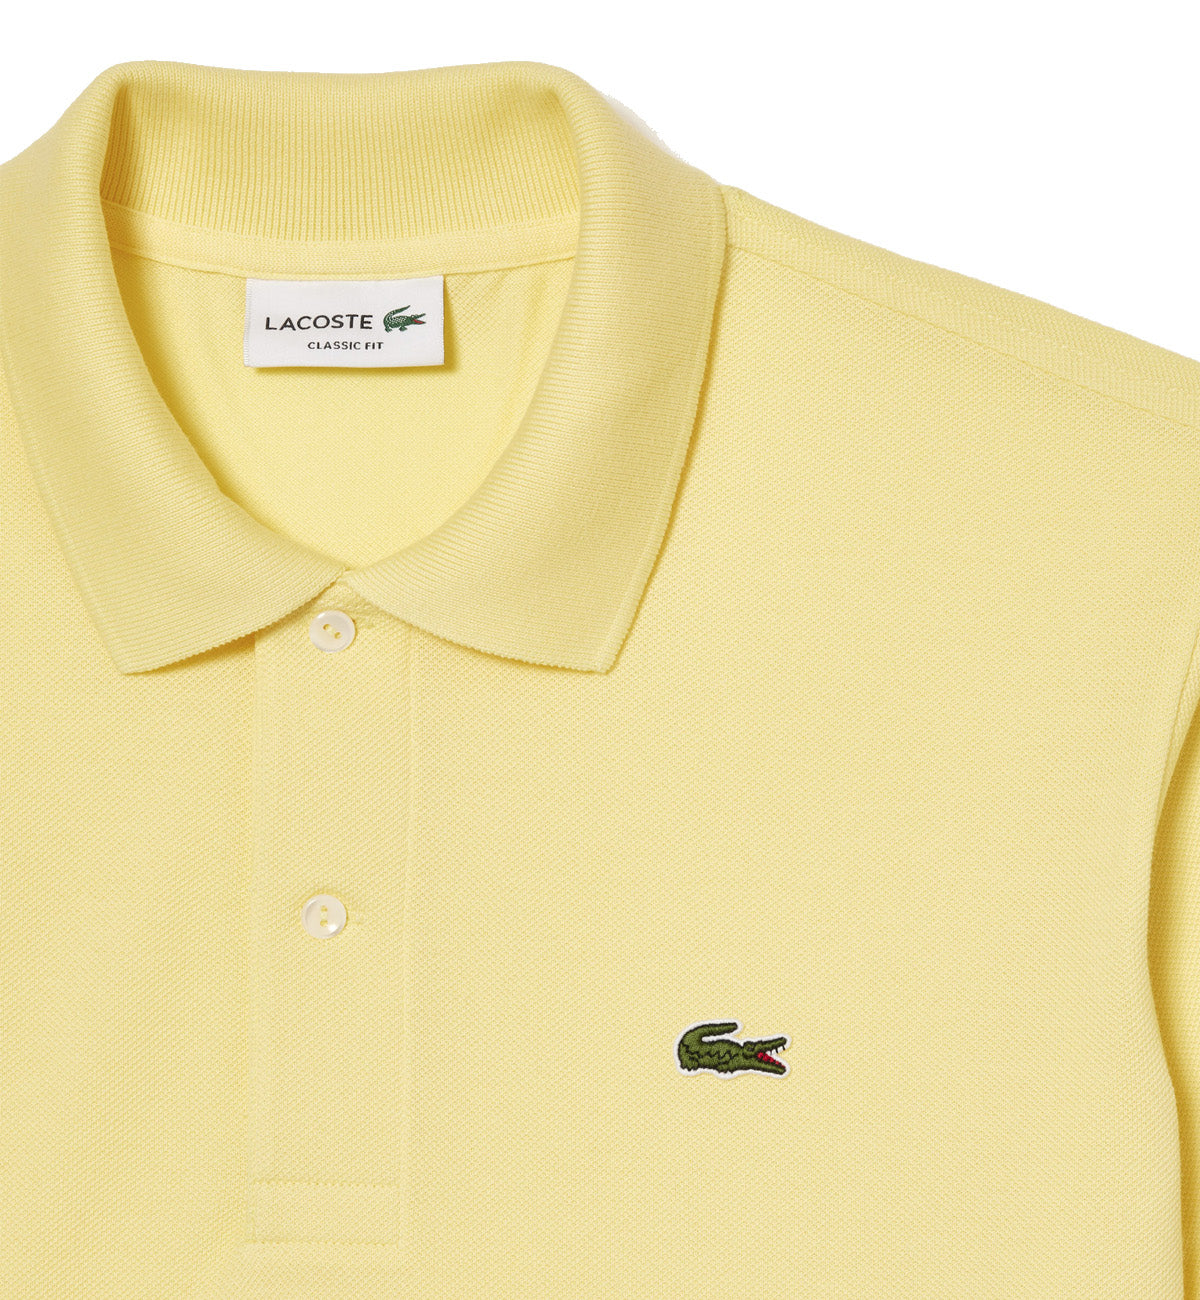 Lacoste Classic Fit Cotton Polo Shirt (Pastel Yellow)